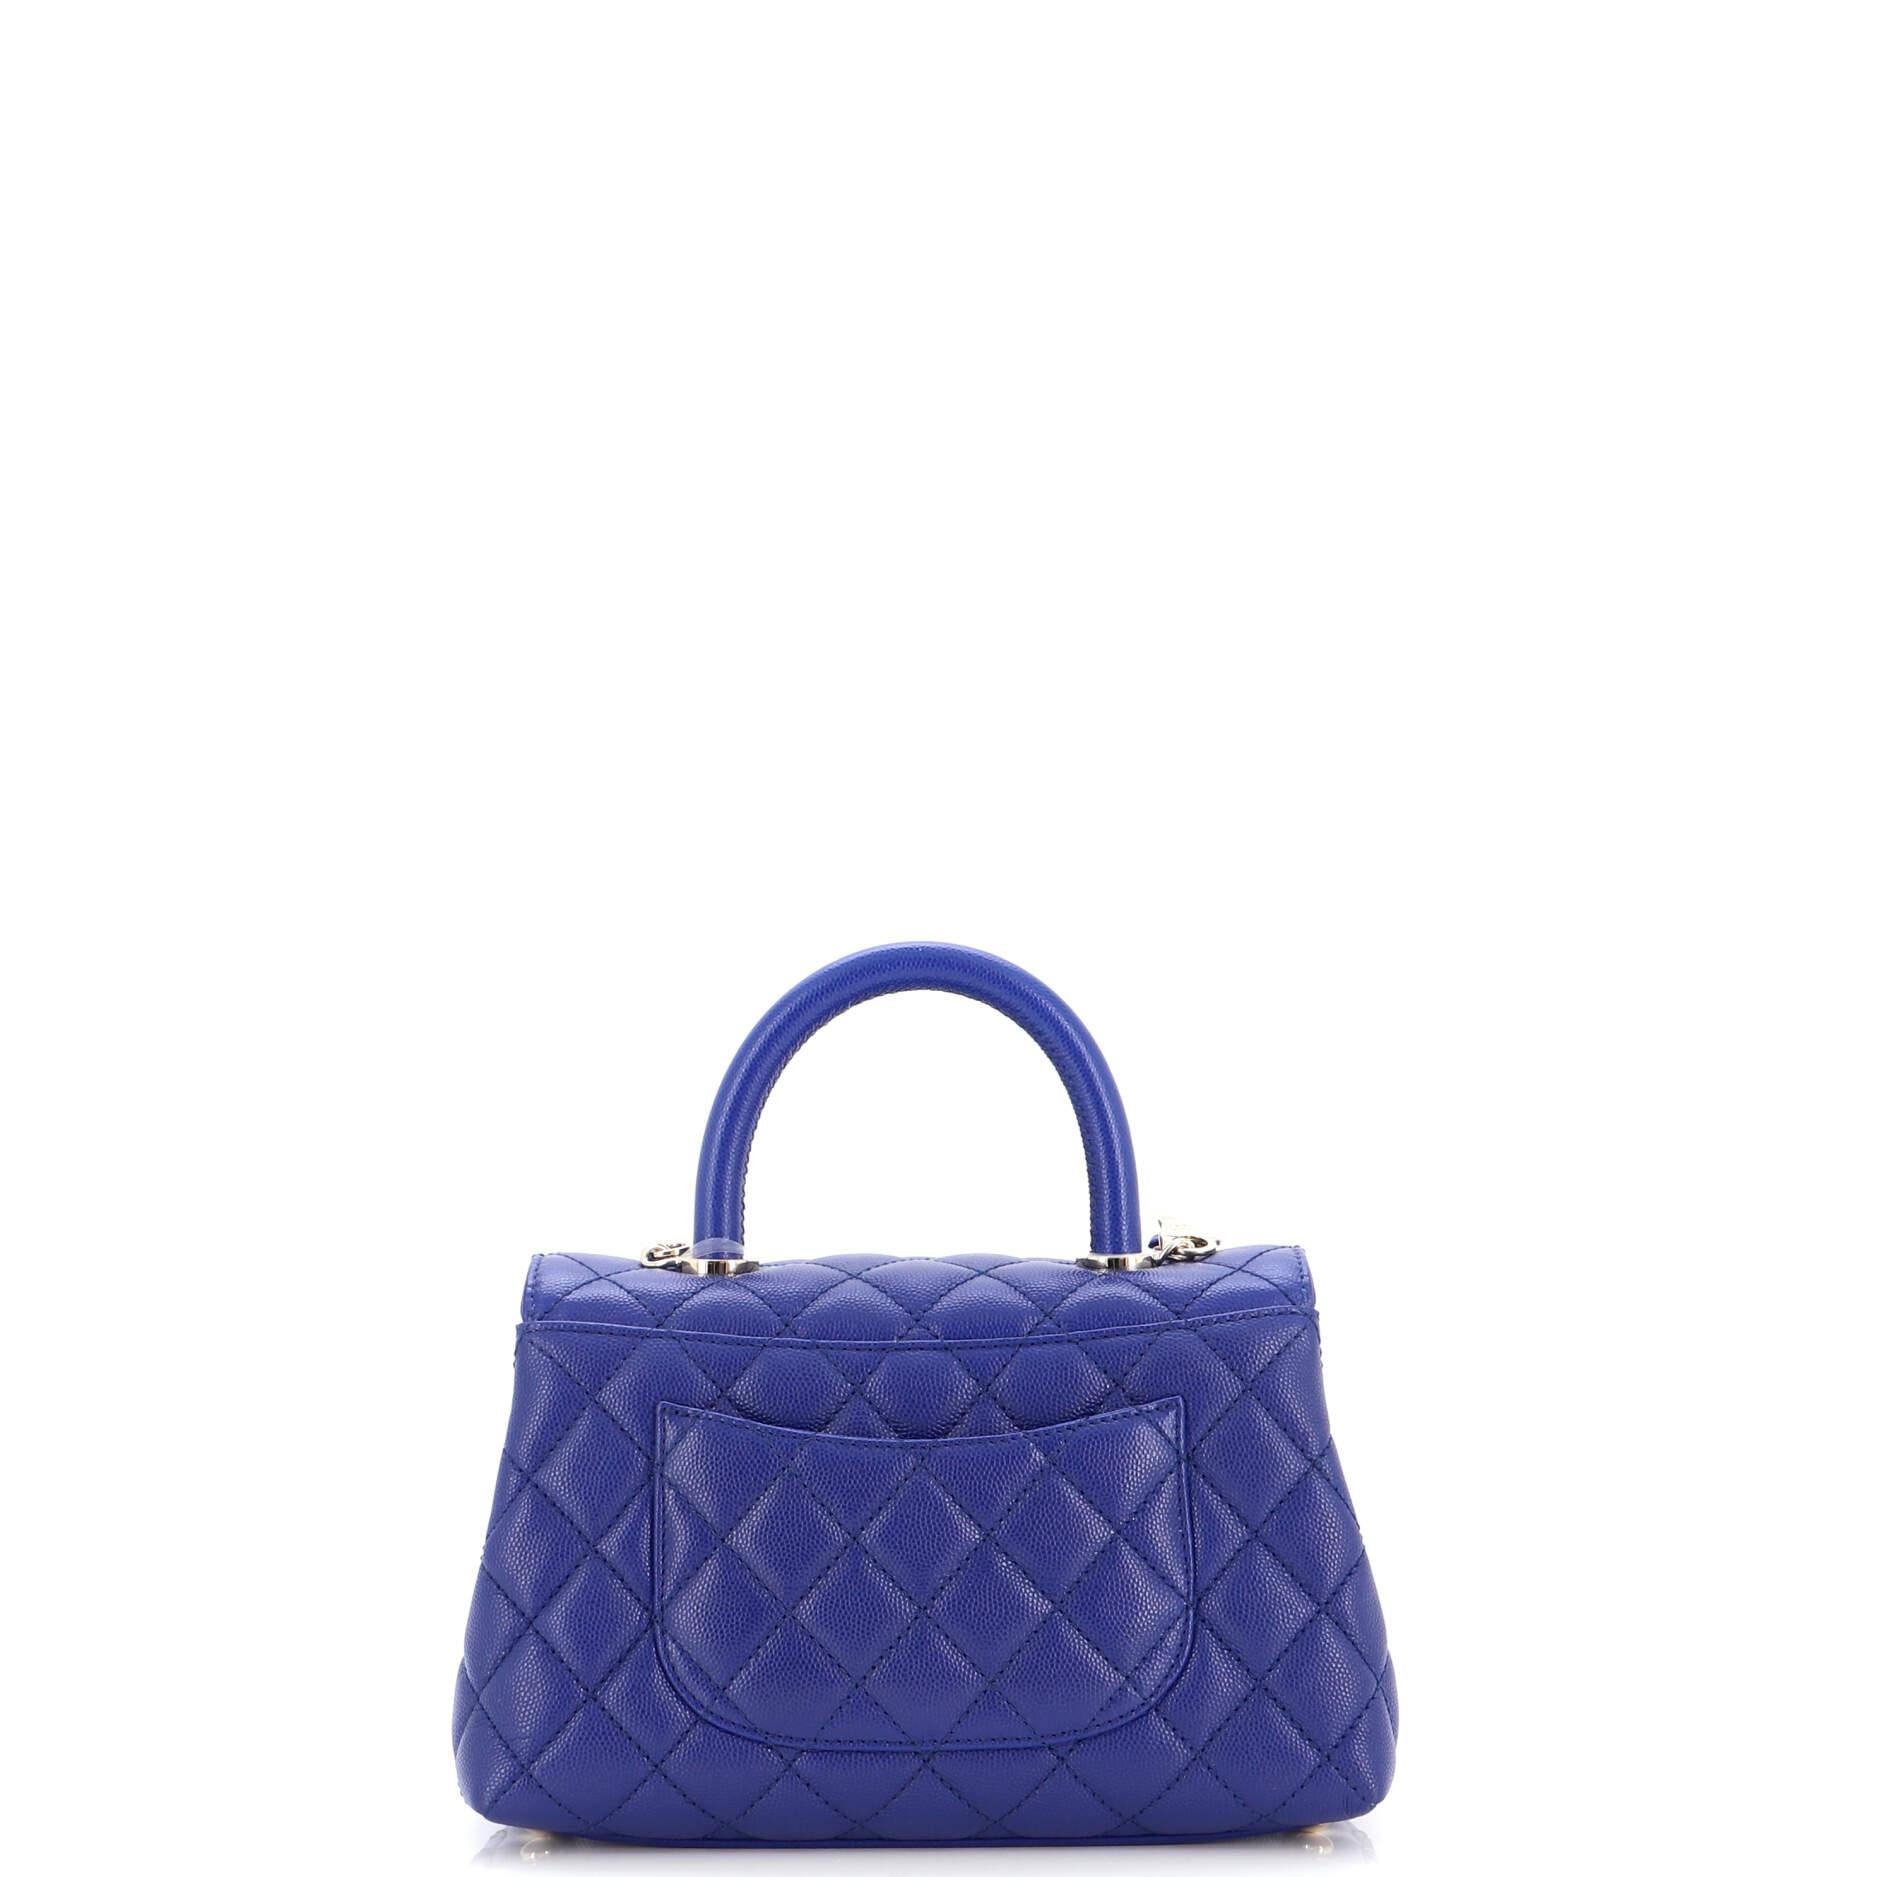 Chanel Coco Top Handle Tasche Gesteppt Kaviar Mini im Zustand „Gut“ im Angebot in NY, NY